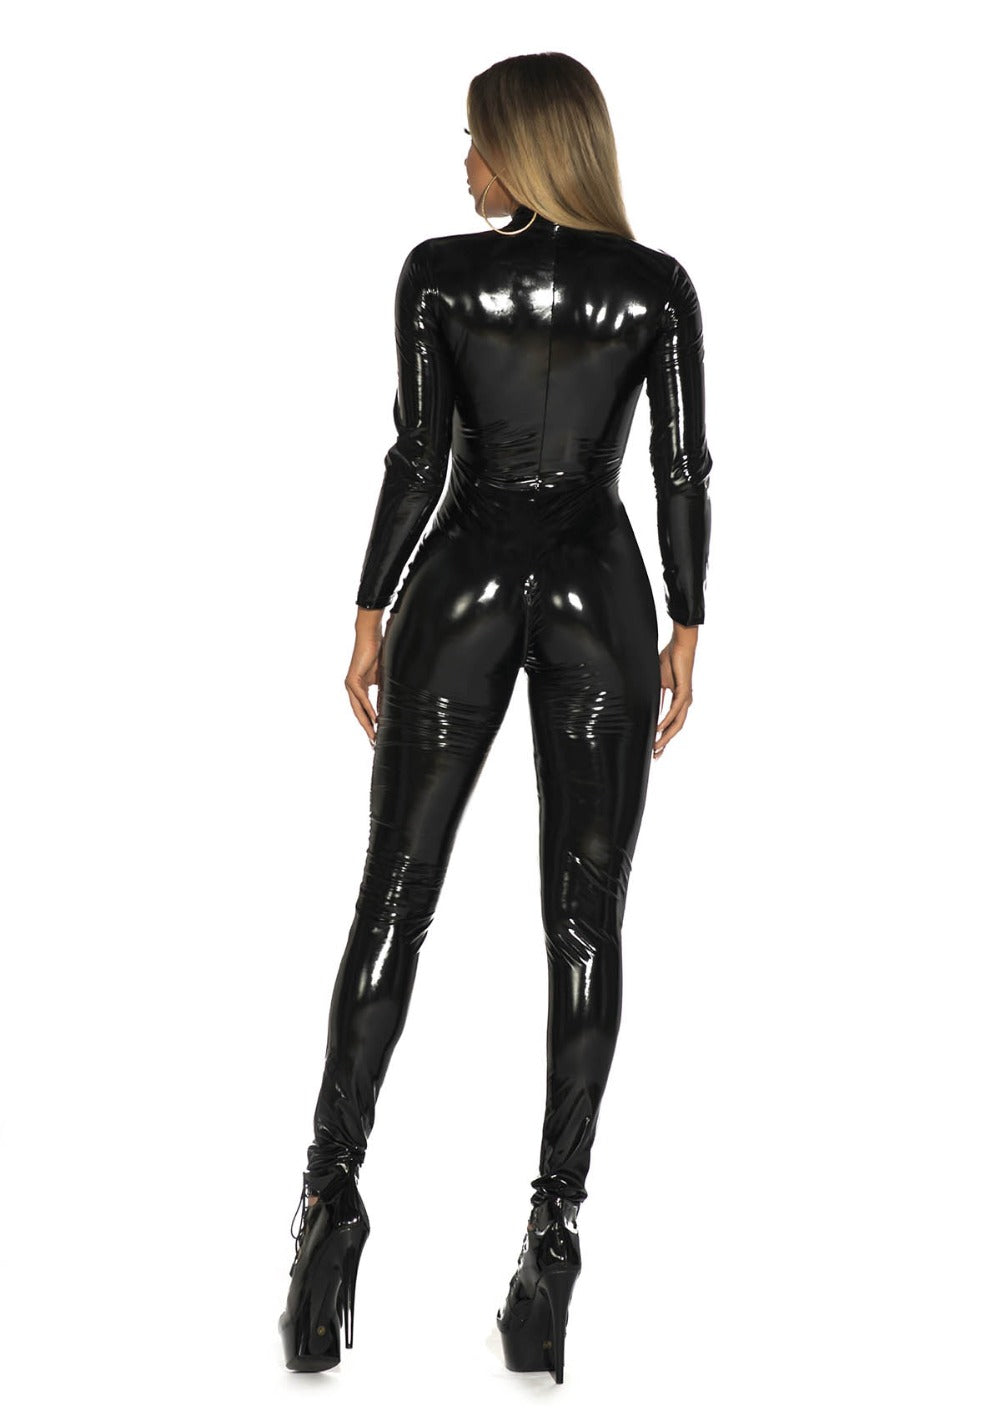 Black Red Wetlook Faux Leather Long Sleeve Pvc Catsuit Front Zipper Open Crotch Stretch Clubwear Overalls Jumpsuit The Clothing Company Sydney